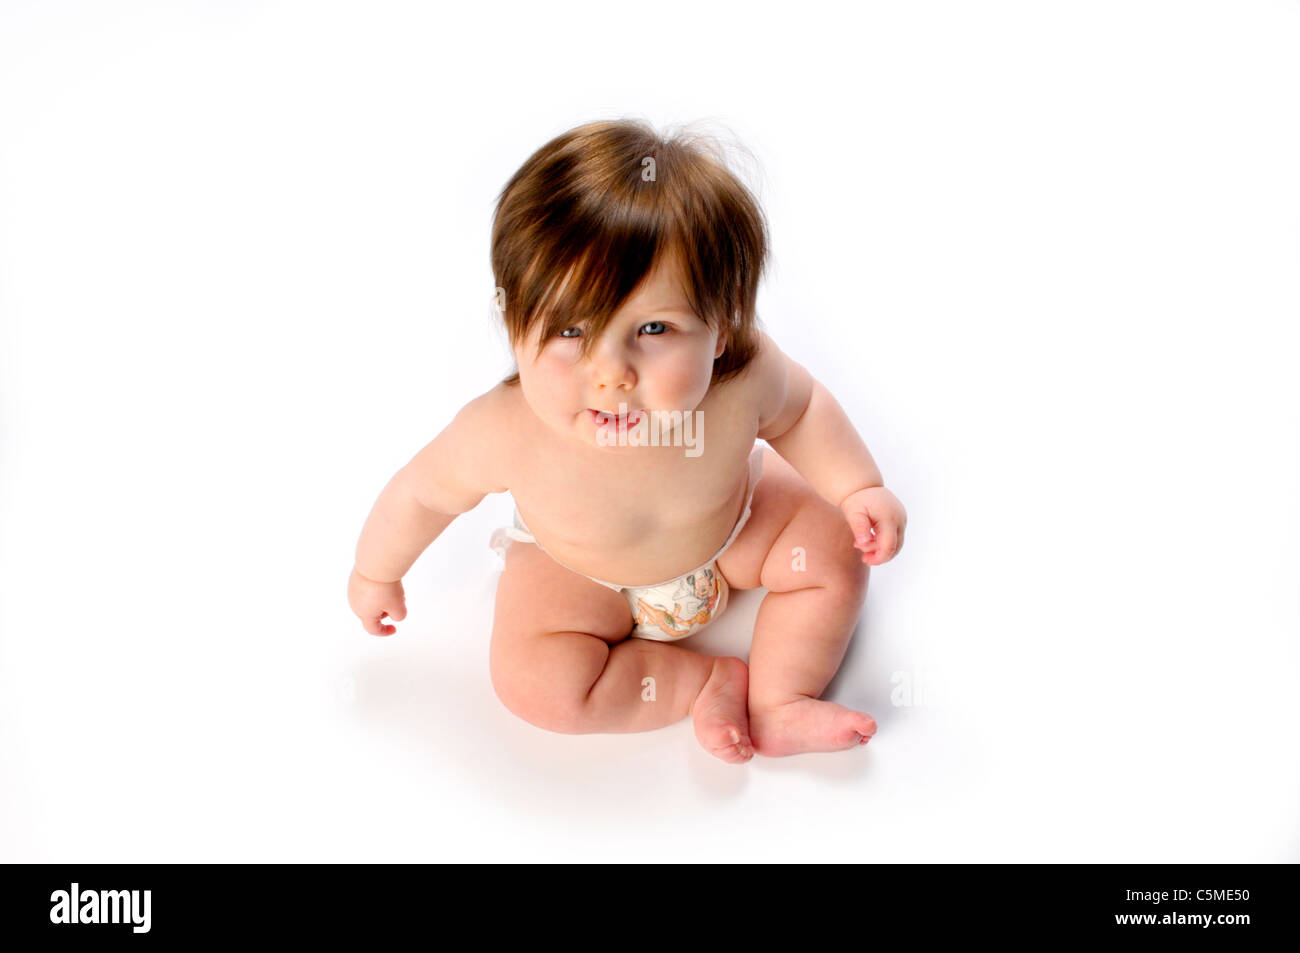 cute adorable baby girl on white background Stock Photo